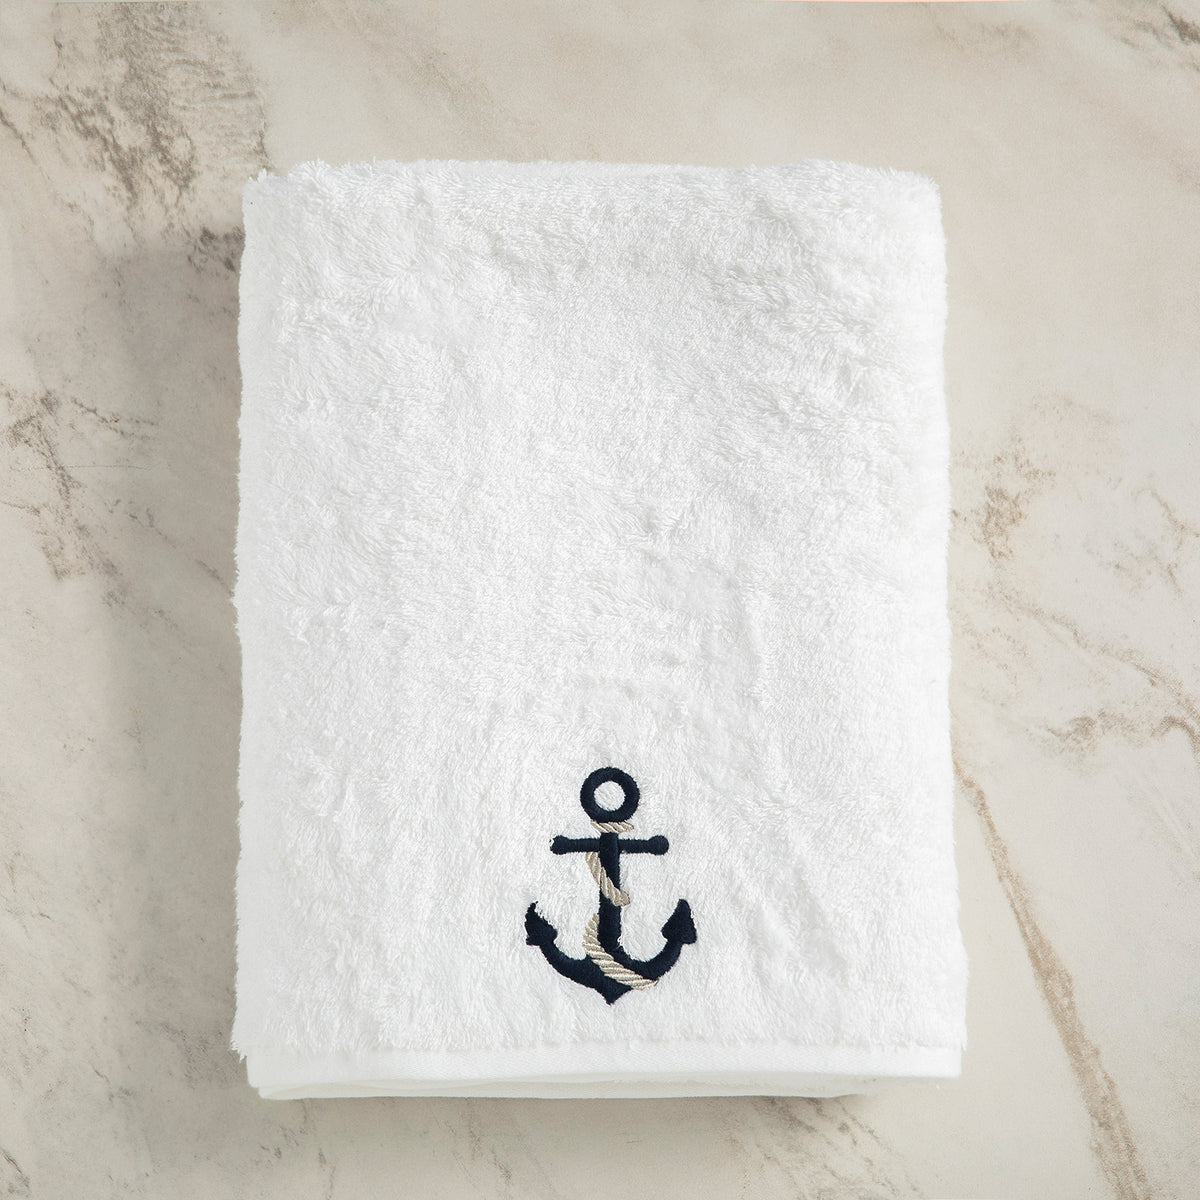 Turkish Terry Towel with Anchor Embroidery, White, for Boat or Bath, ultra soft, very absorbent